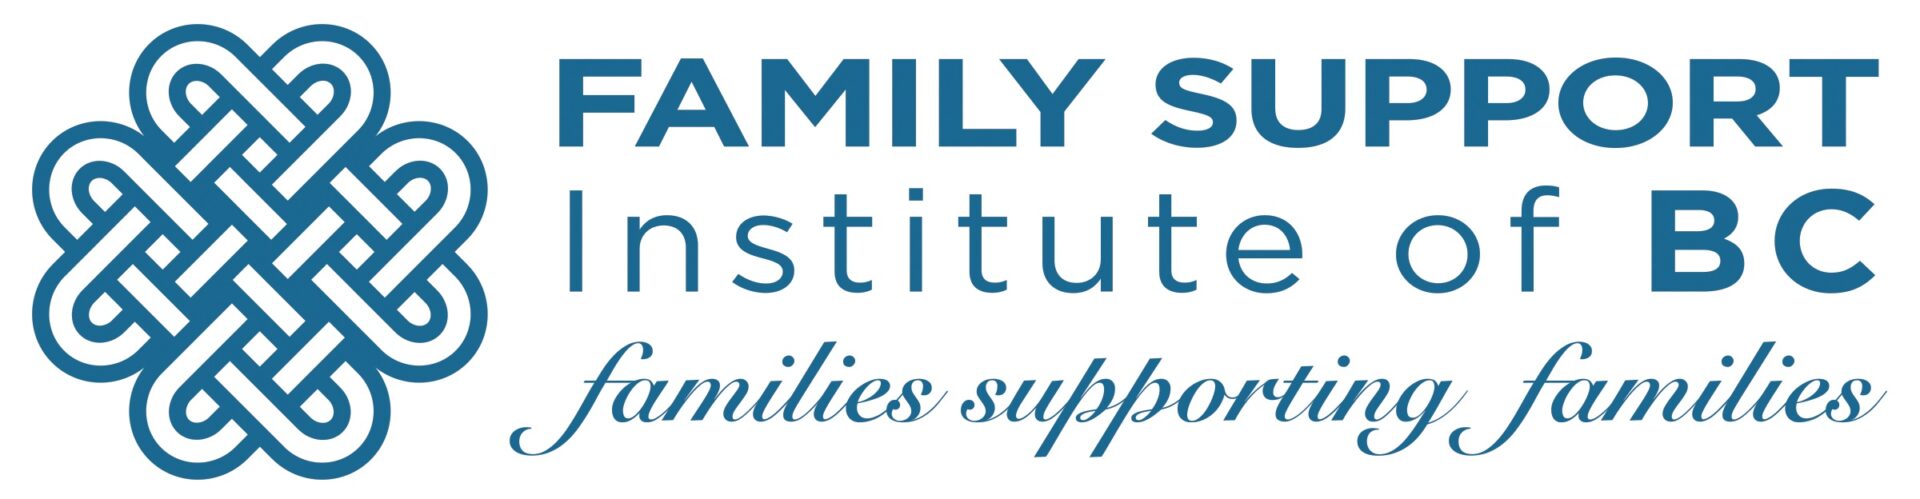 Family support institute of BC FSIBC